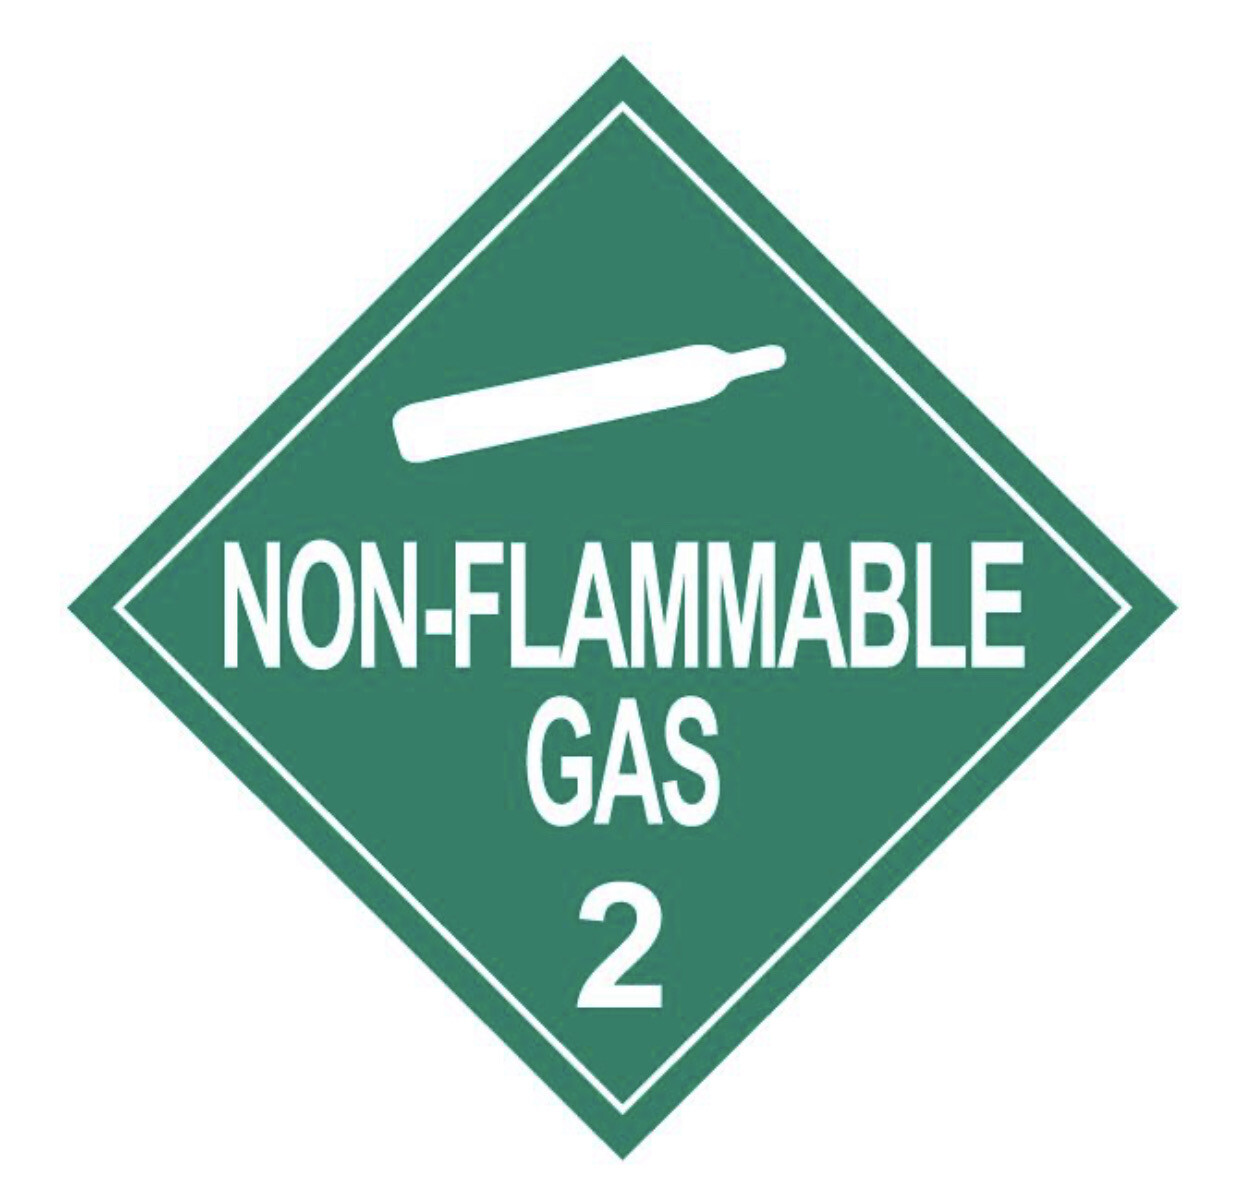 CLASS 8 CORROSIVE HAZMAT PLACARD DECAL OR MAGNETIC SIGN PLACARD